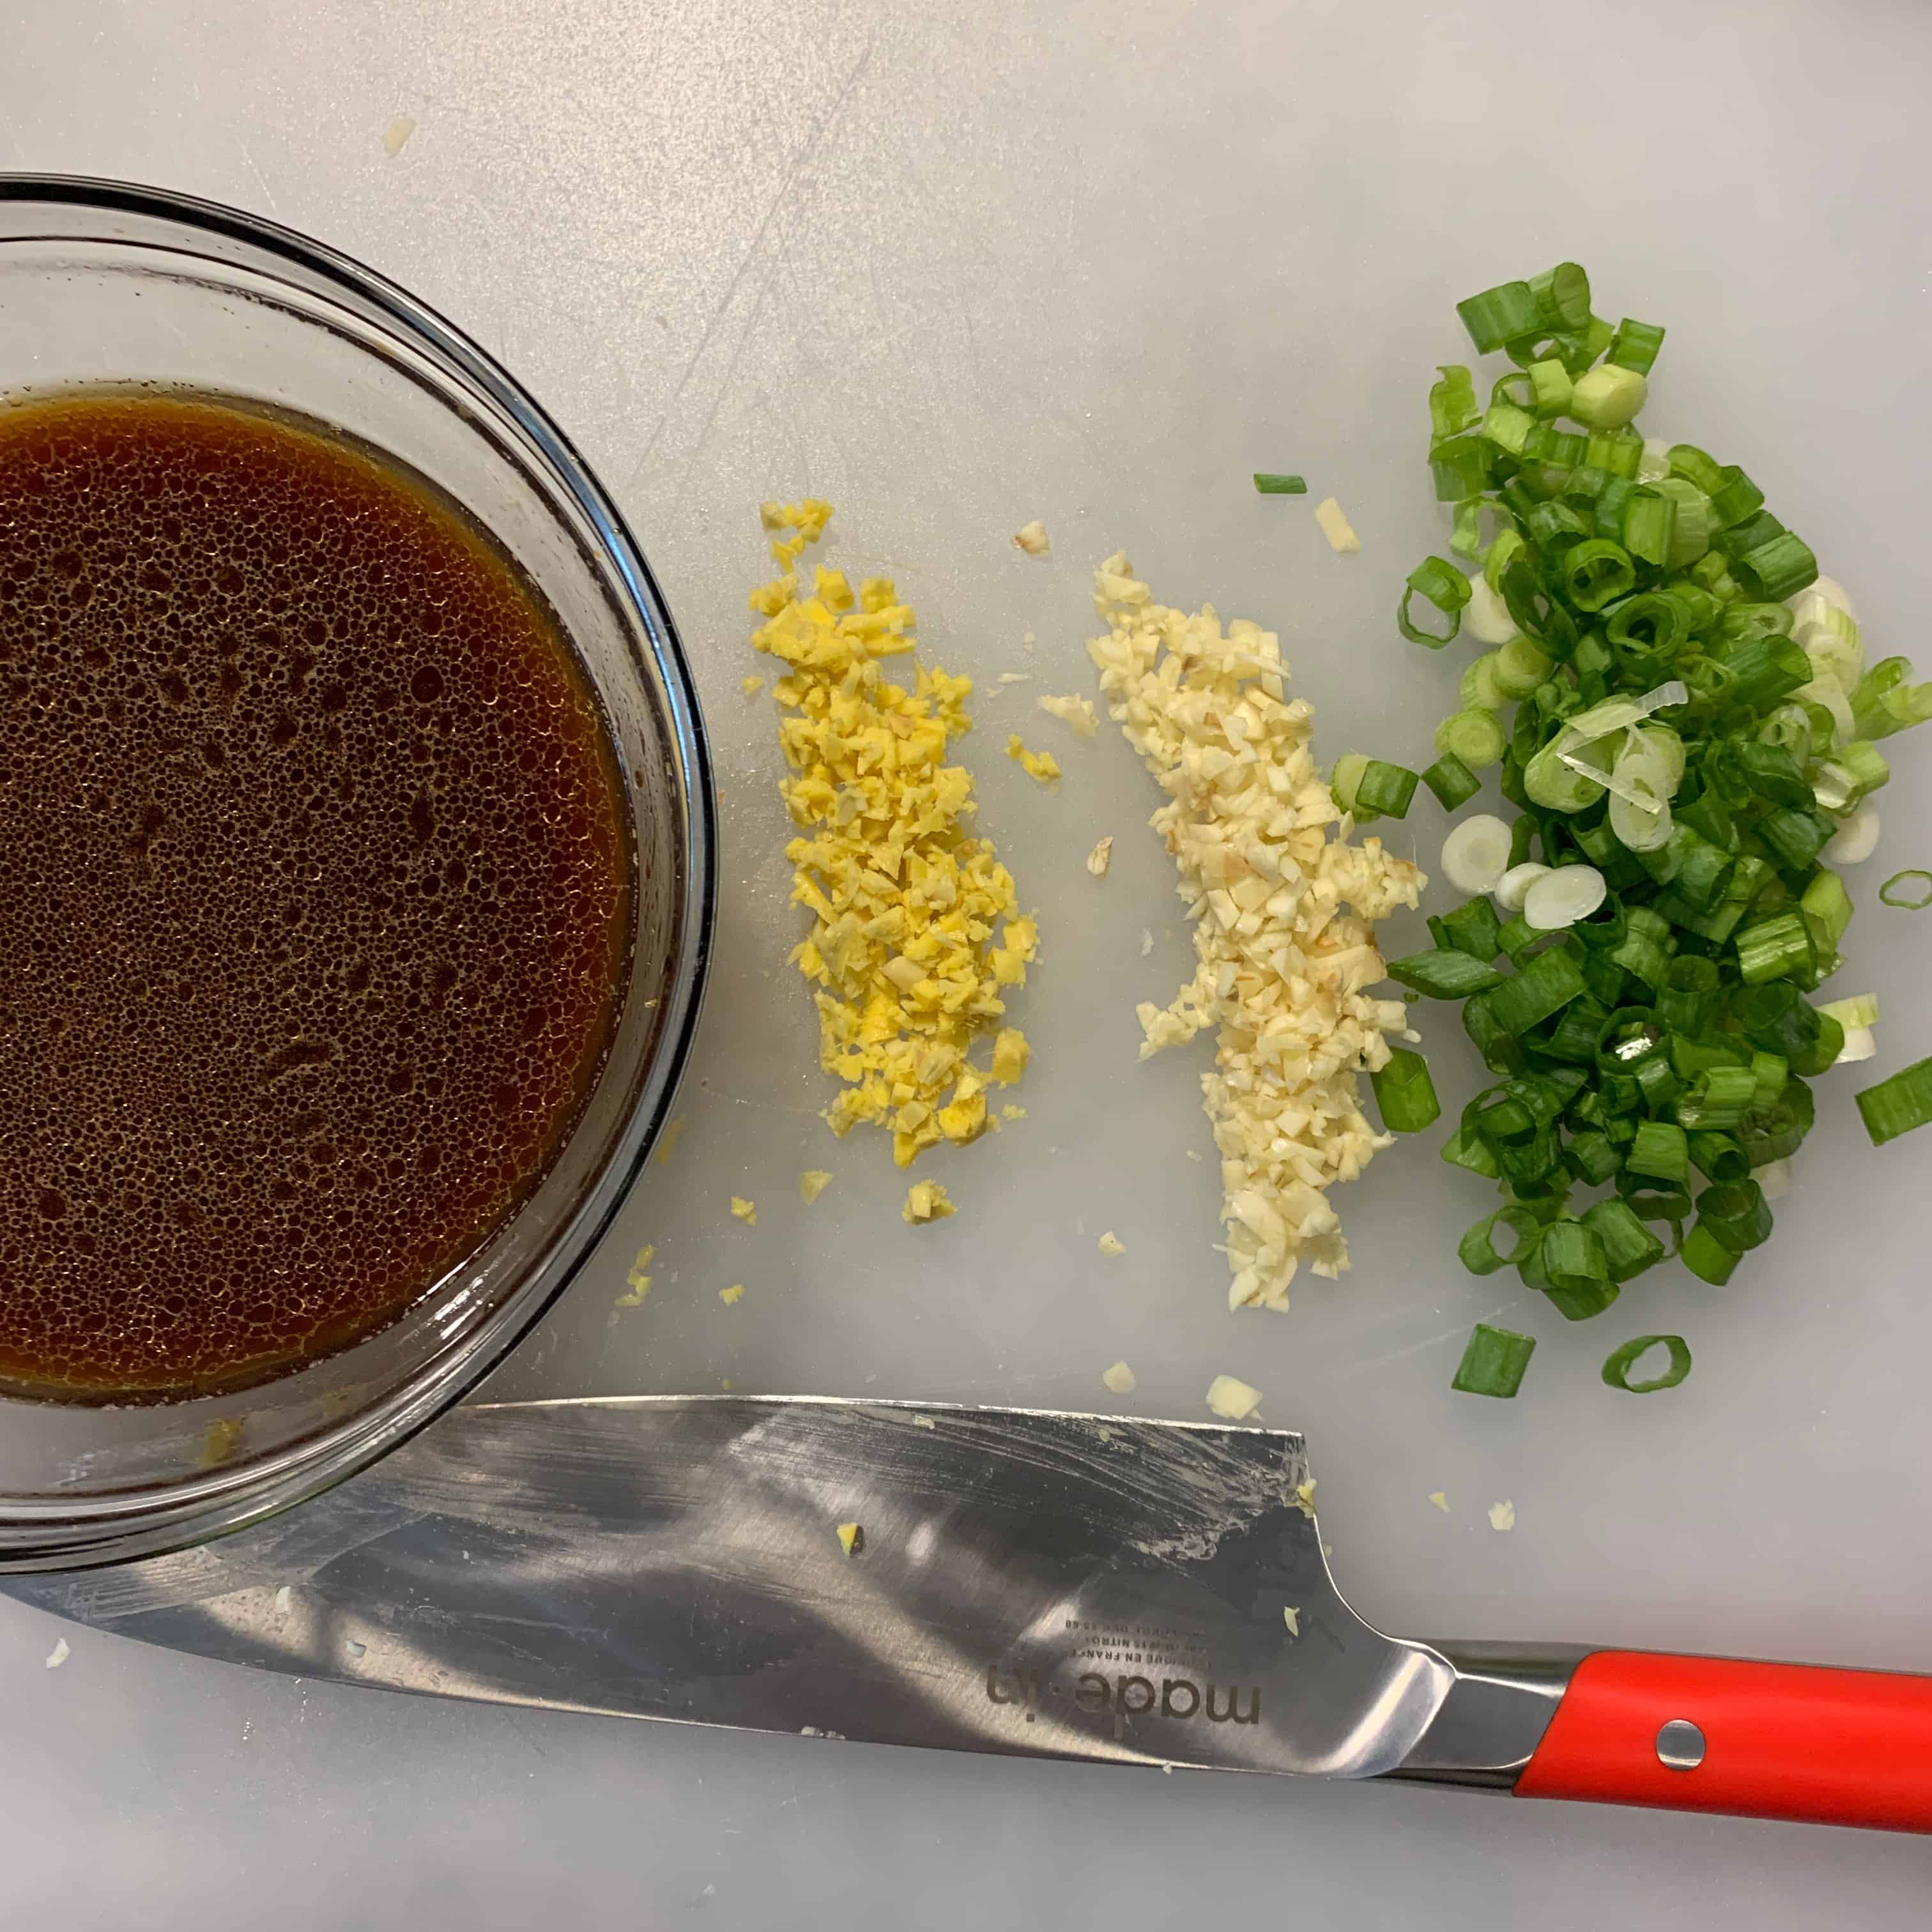 ingredients prepped for the general tso sauce